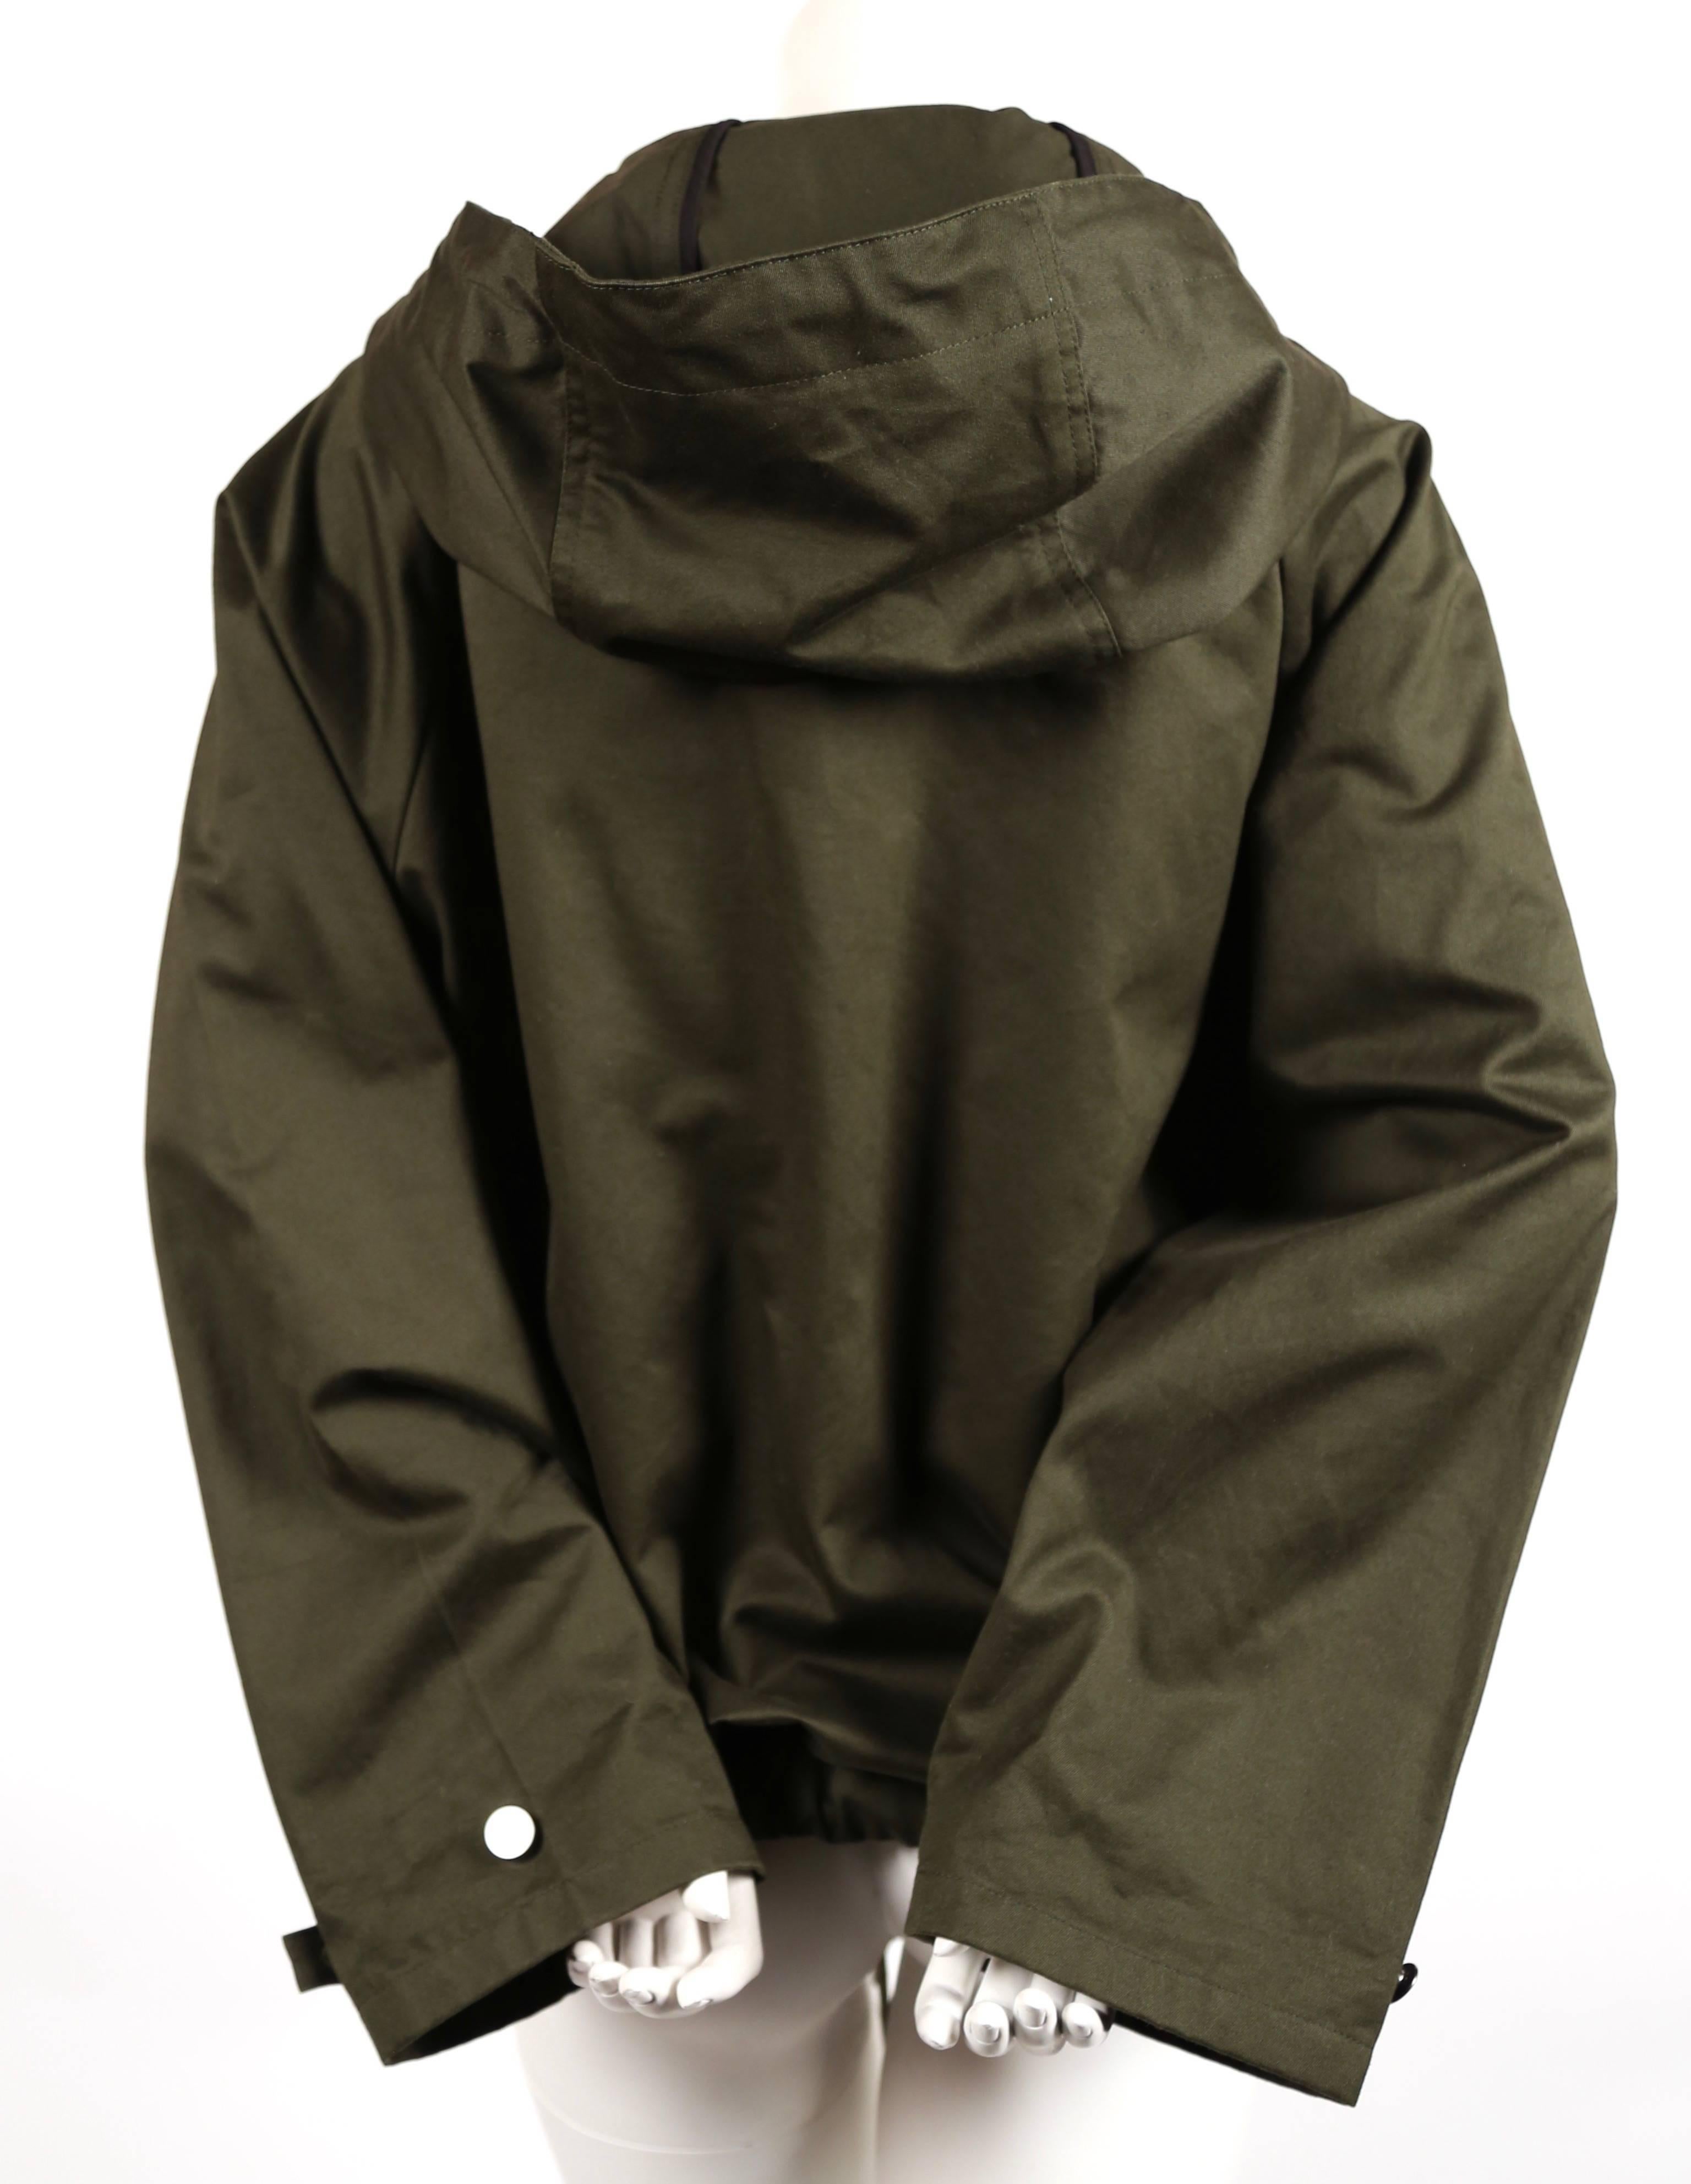 Women's or Men's Celine By Phoebe Philo army green anorak jacket in polished cotton For Sale